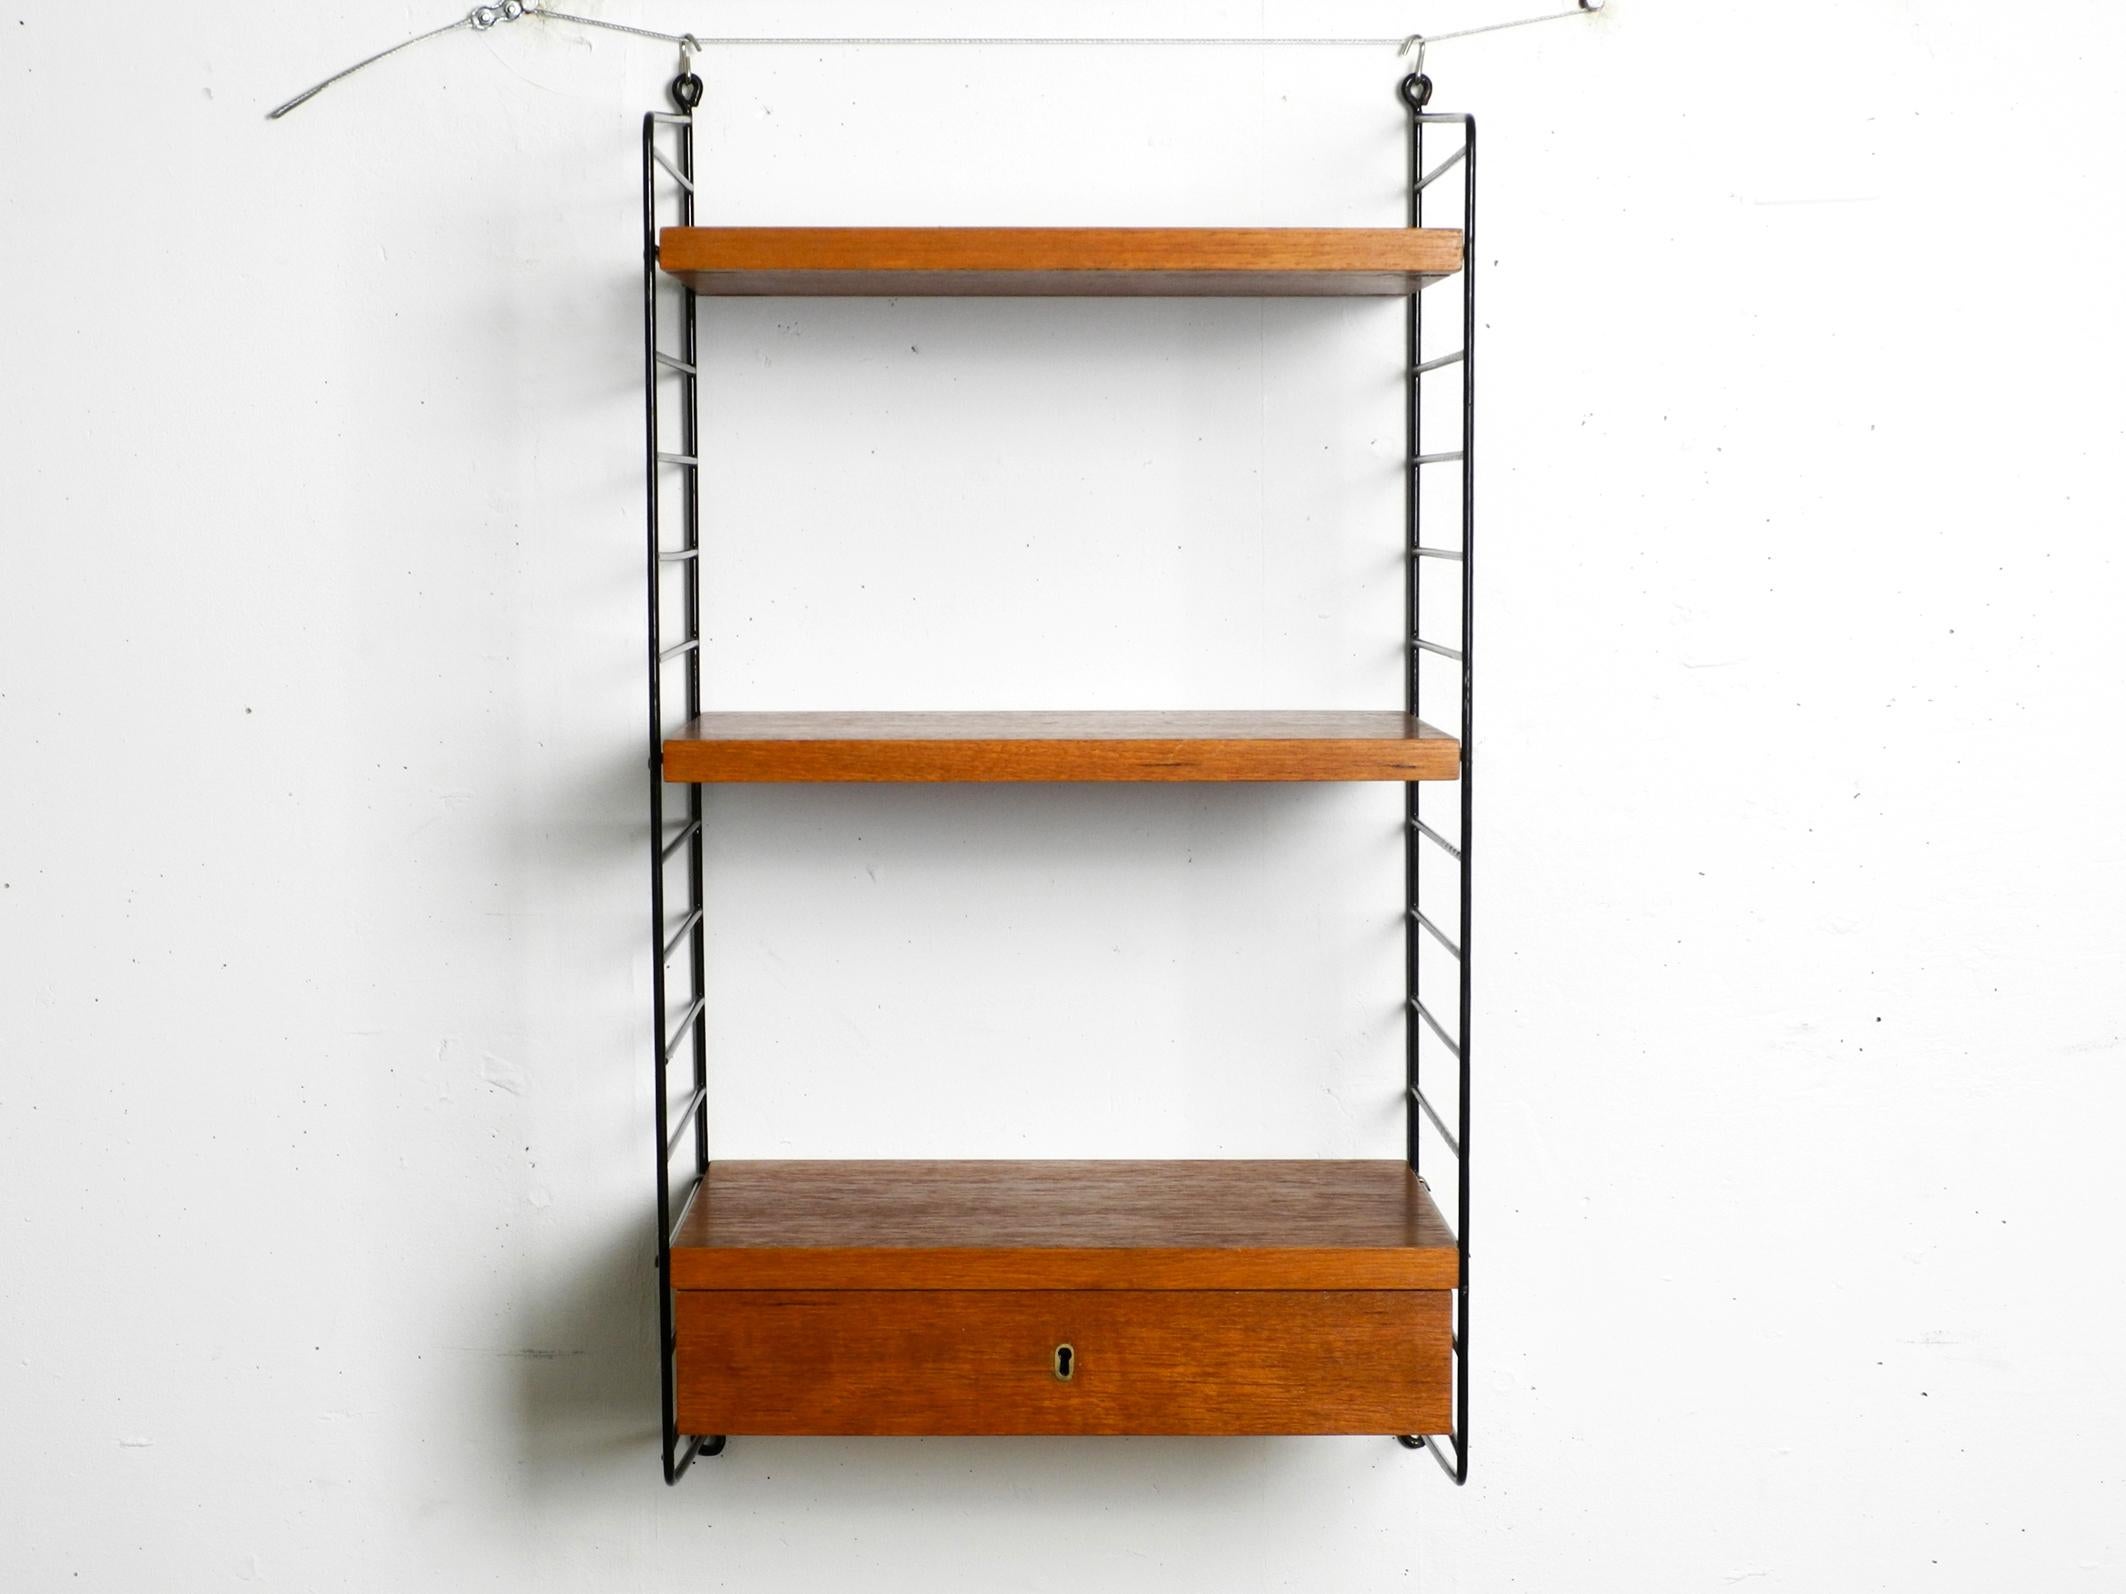 Narrow original 60s Nisse Strinning String teak wall shelf. 
Made in Sweden. 
Two ladders with shelfs and one drawer with a depth of 30cm. 
All wooden parts are covered with teak veneer.
Very clean with few normal signs of use.
All ladders are in